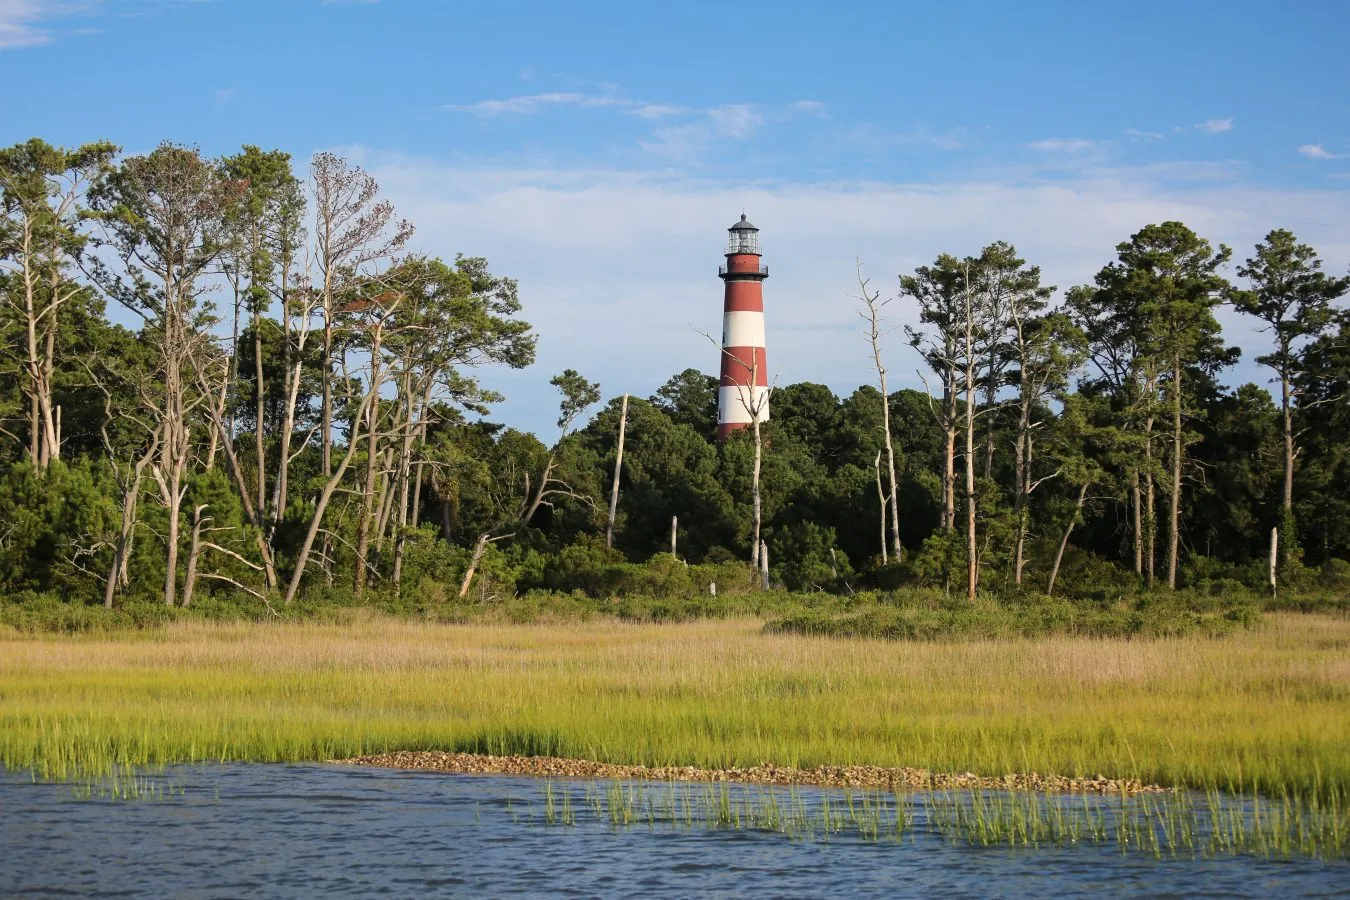 assateague lighthouse in chincoteague virginia, as seen from the water